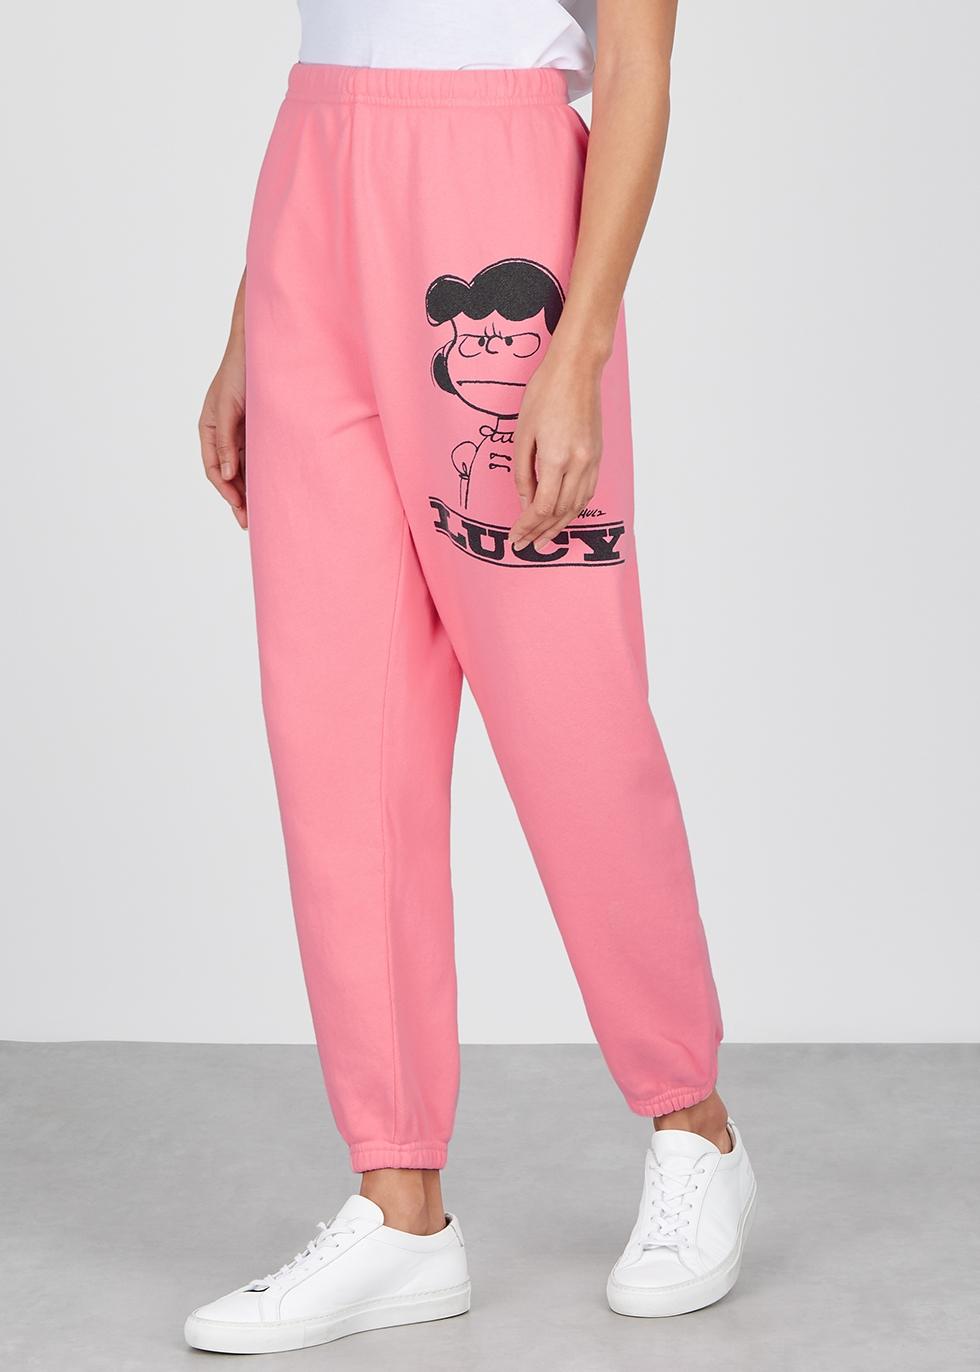 Marc Jacobs X Peanuts Lucy Cotton-jersey Sweatpants in Pink | Lyst